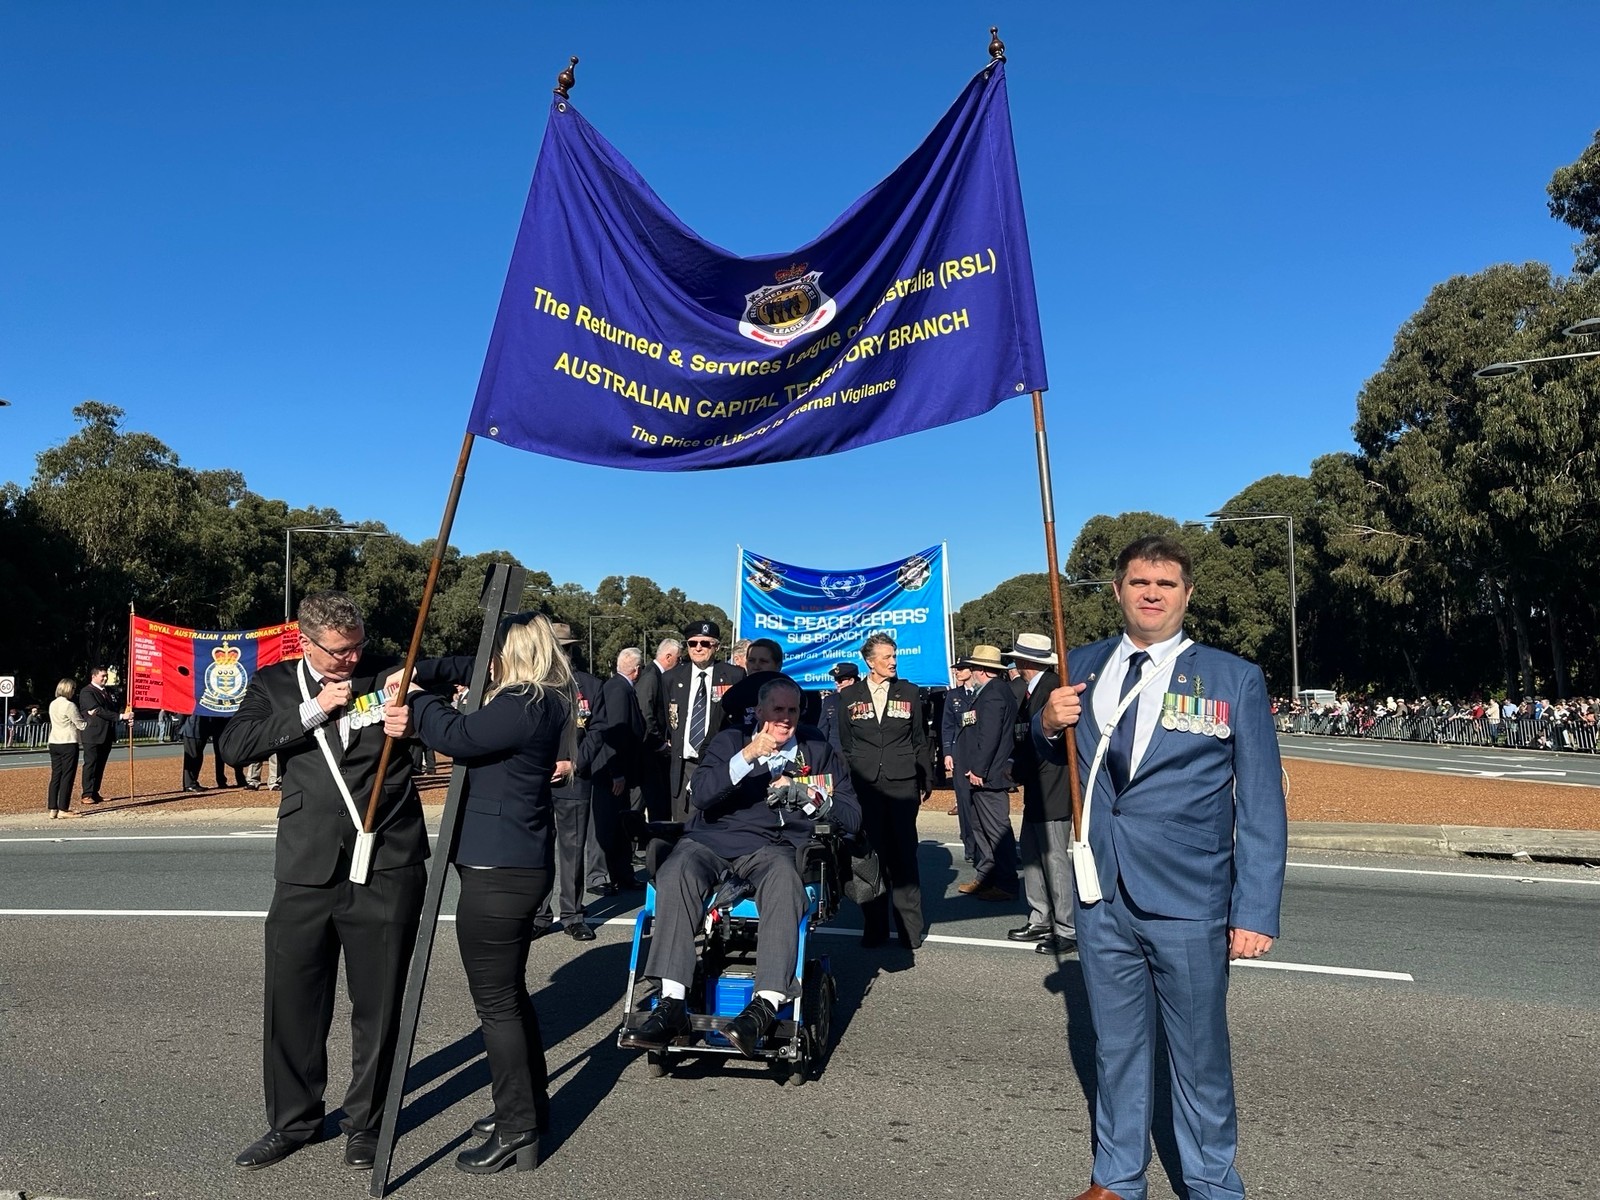 Luke is marching in this years Anzac Day parade